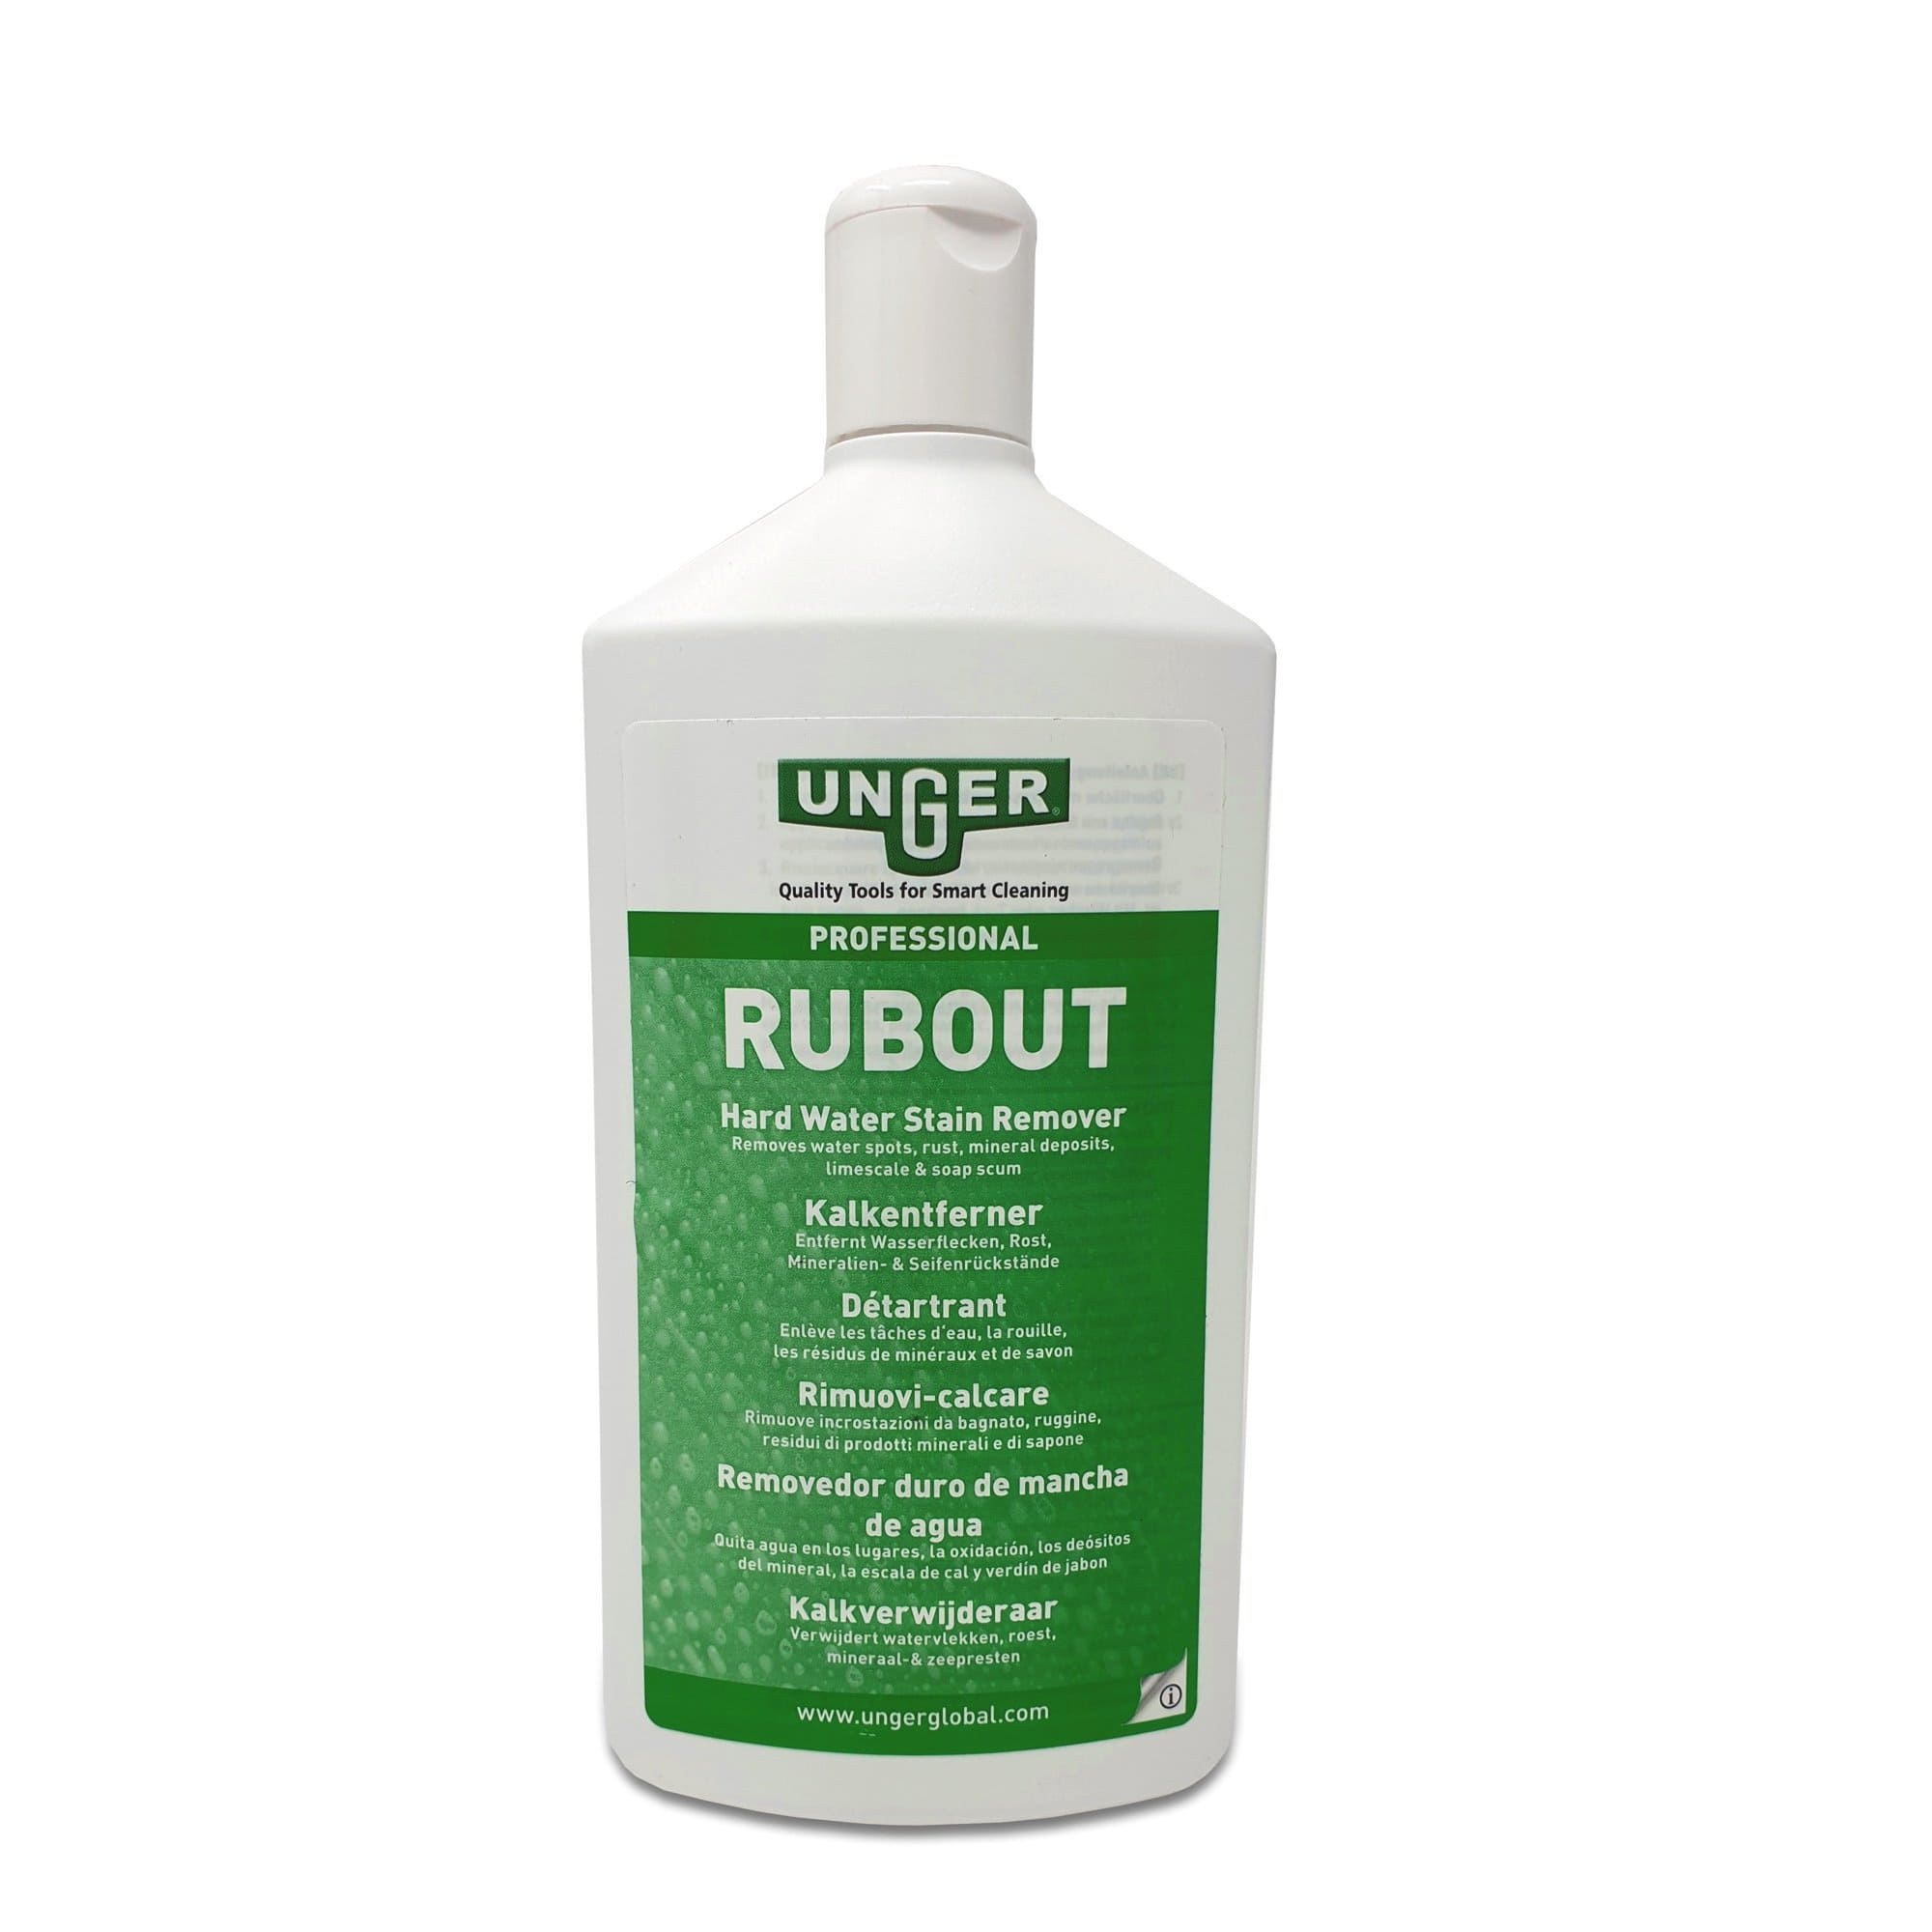 Unger RubOut Hard Water Stain Remover